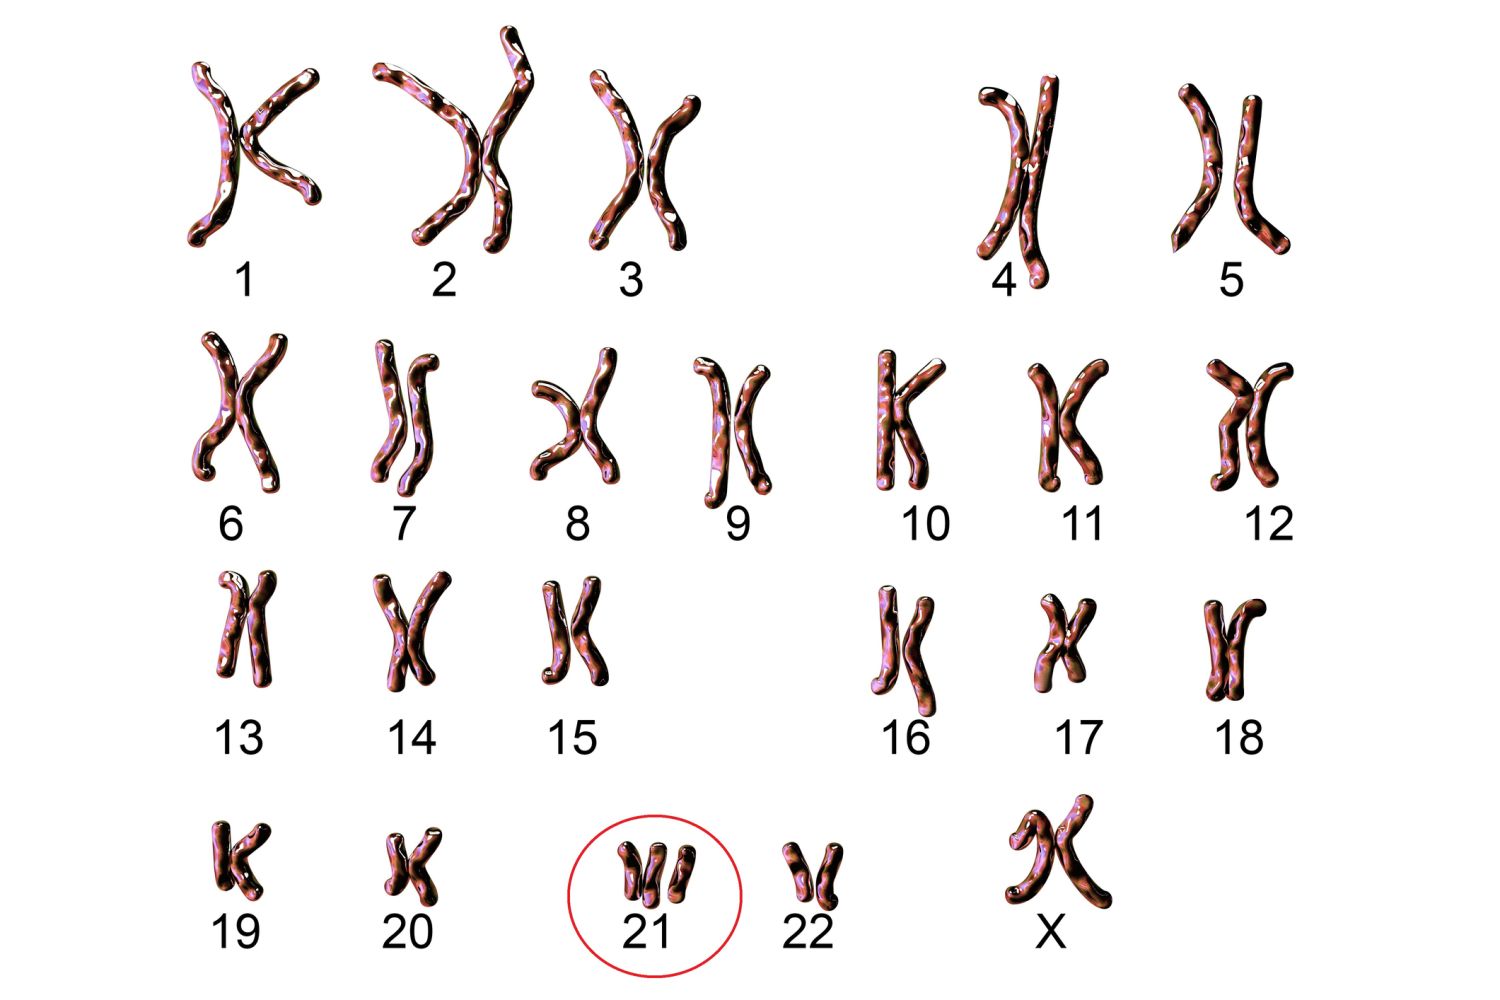 Down Syndrome Chromosome Map